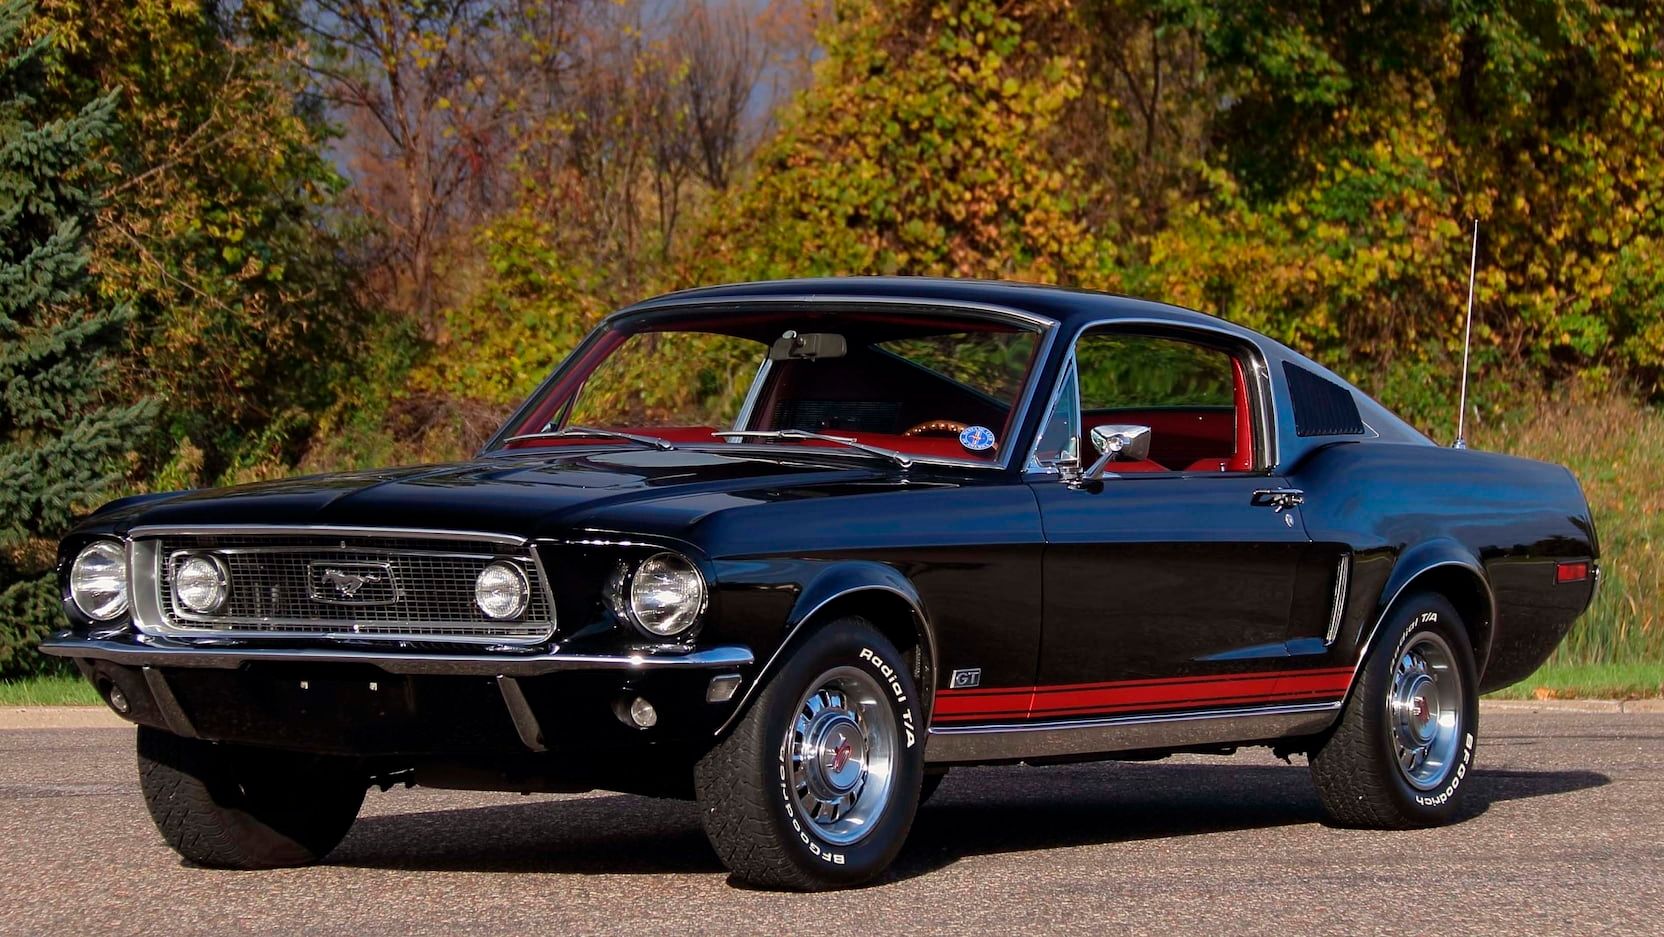 1968 Ford Mustang GT Fastback: The muscle car for all ages.